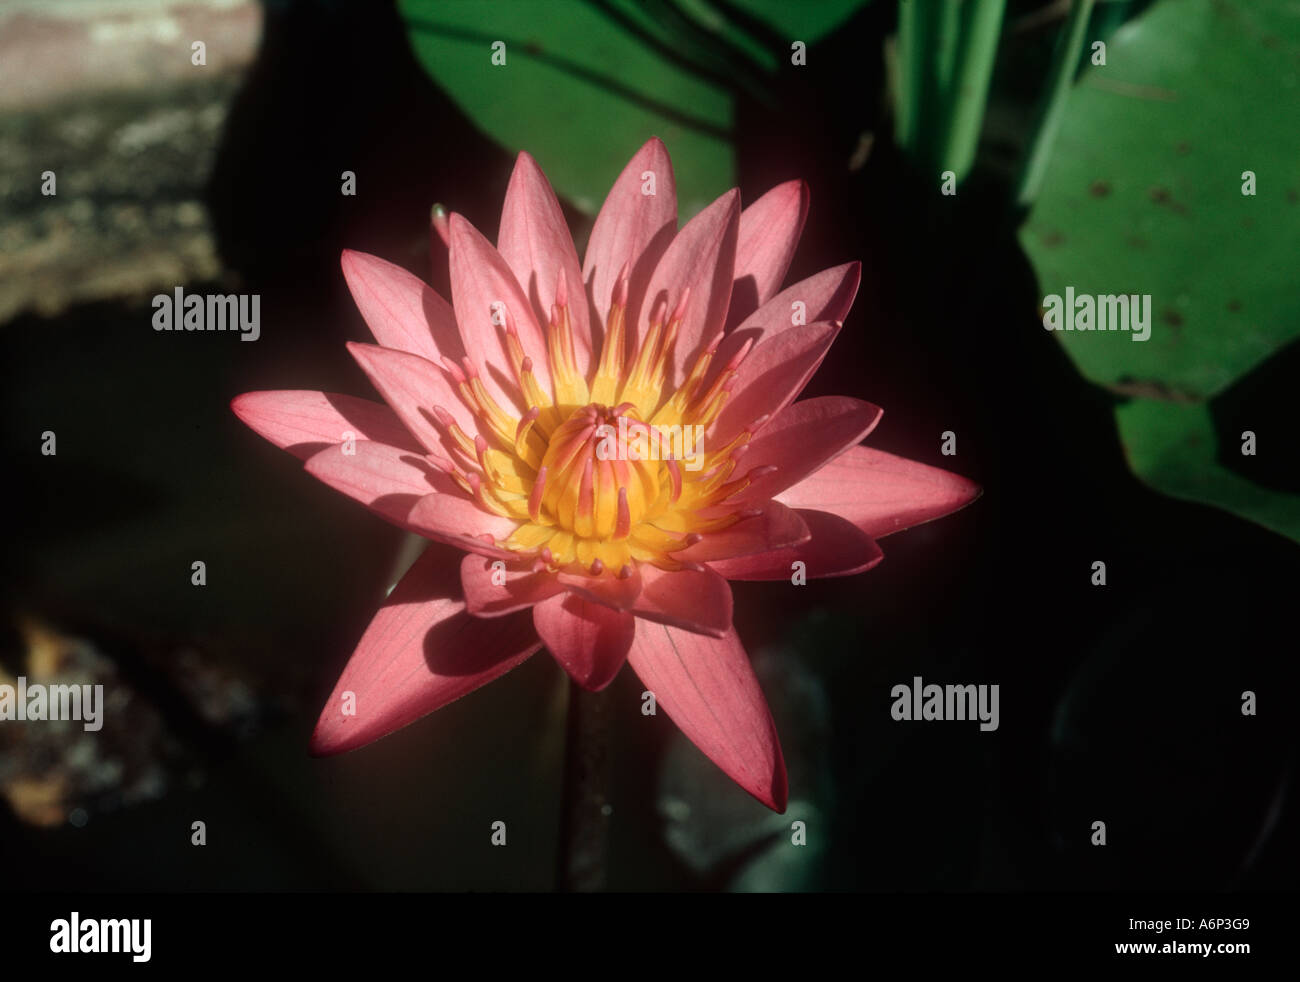 A pink water lily flower Nymphaea sp a common aquotic plant in Thailand Stock Photo